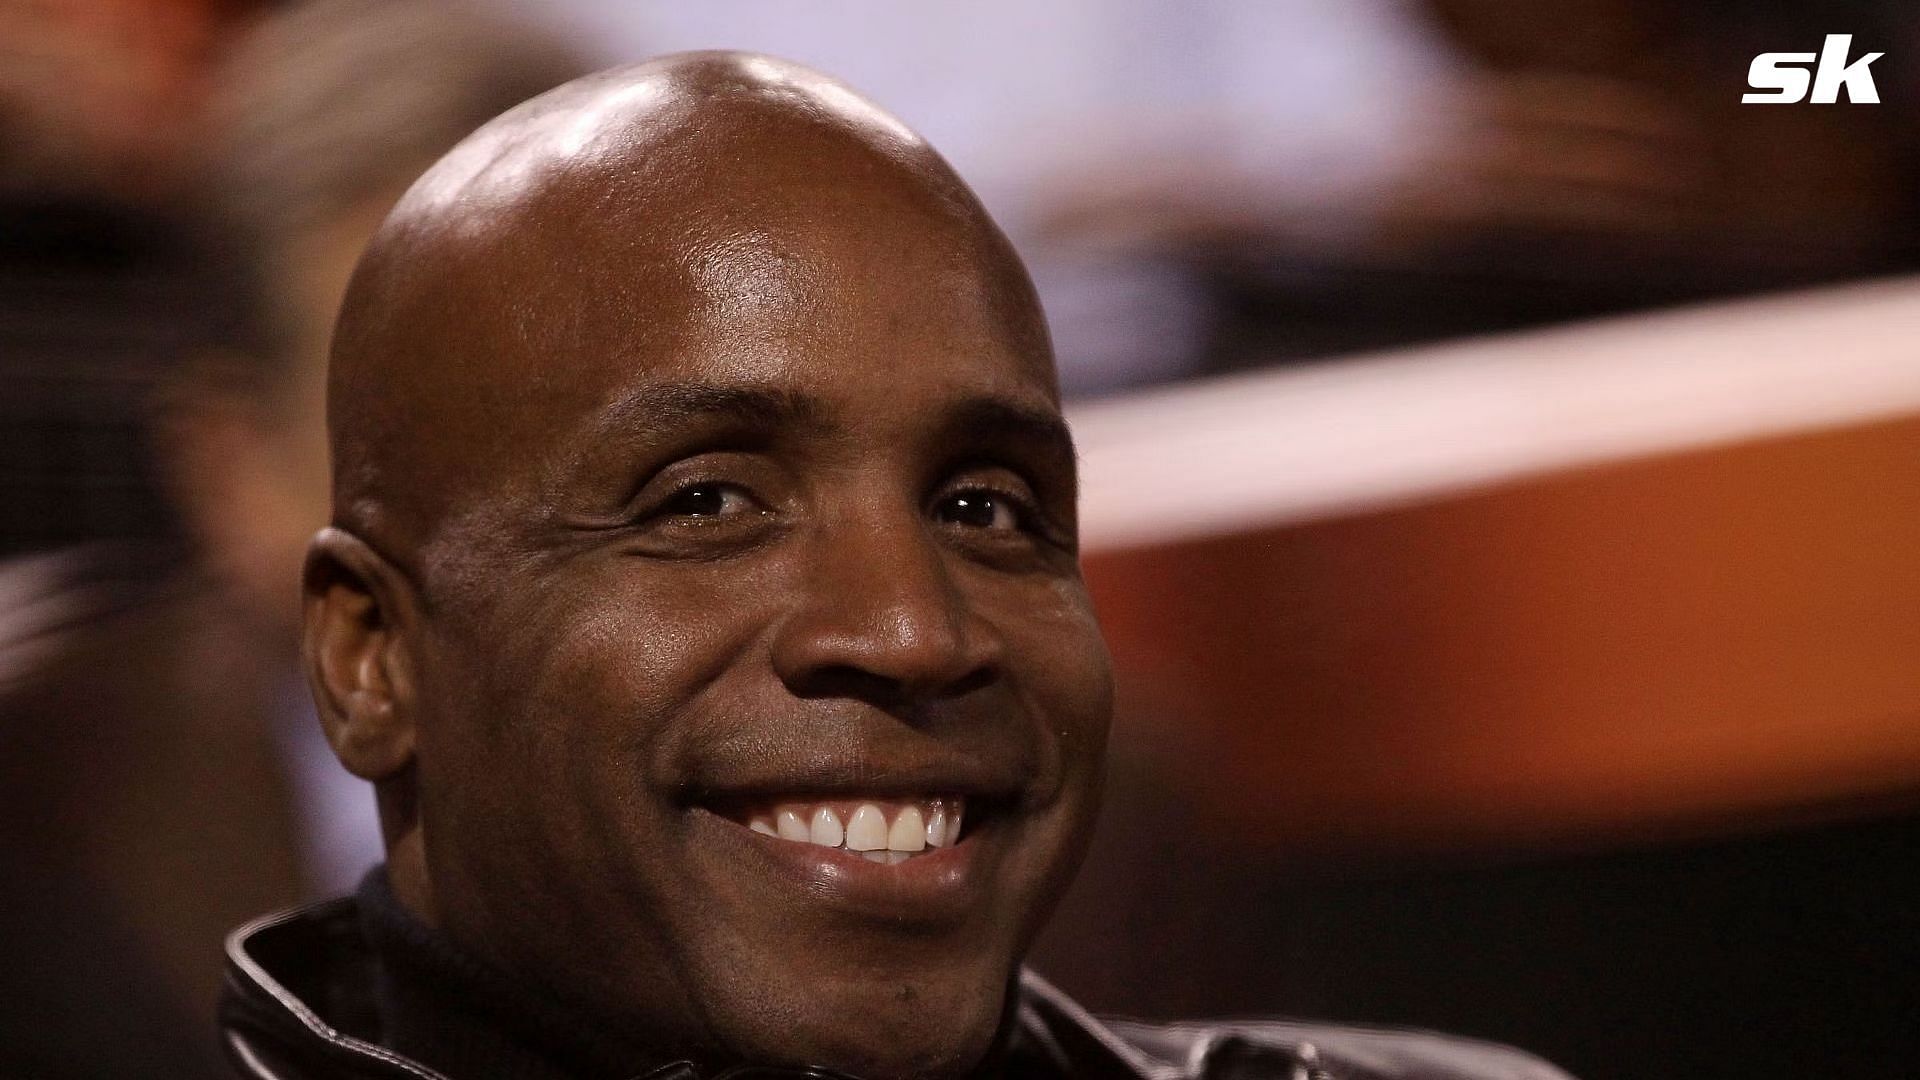 Barry Bonds was once accused of spitting at autograph seekers, directing kids to &quot;f*** off&quot;